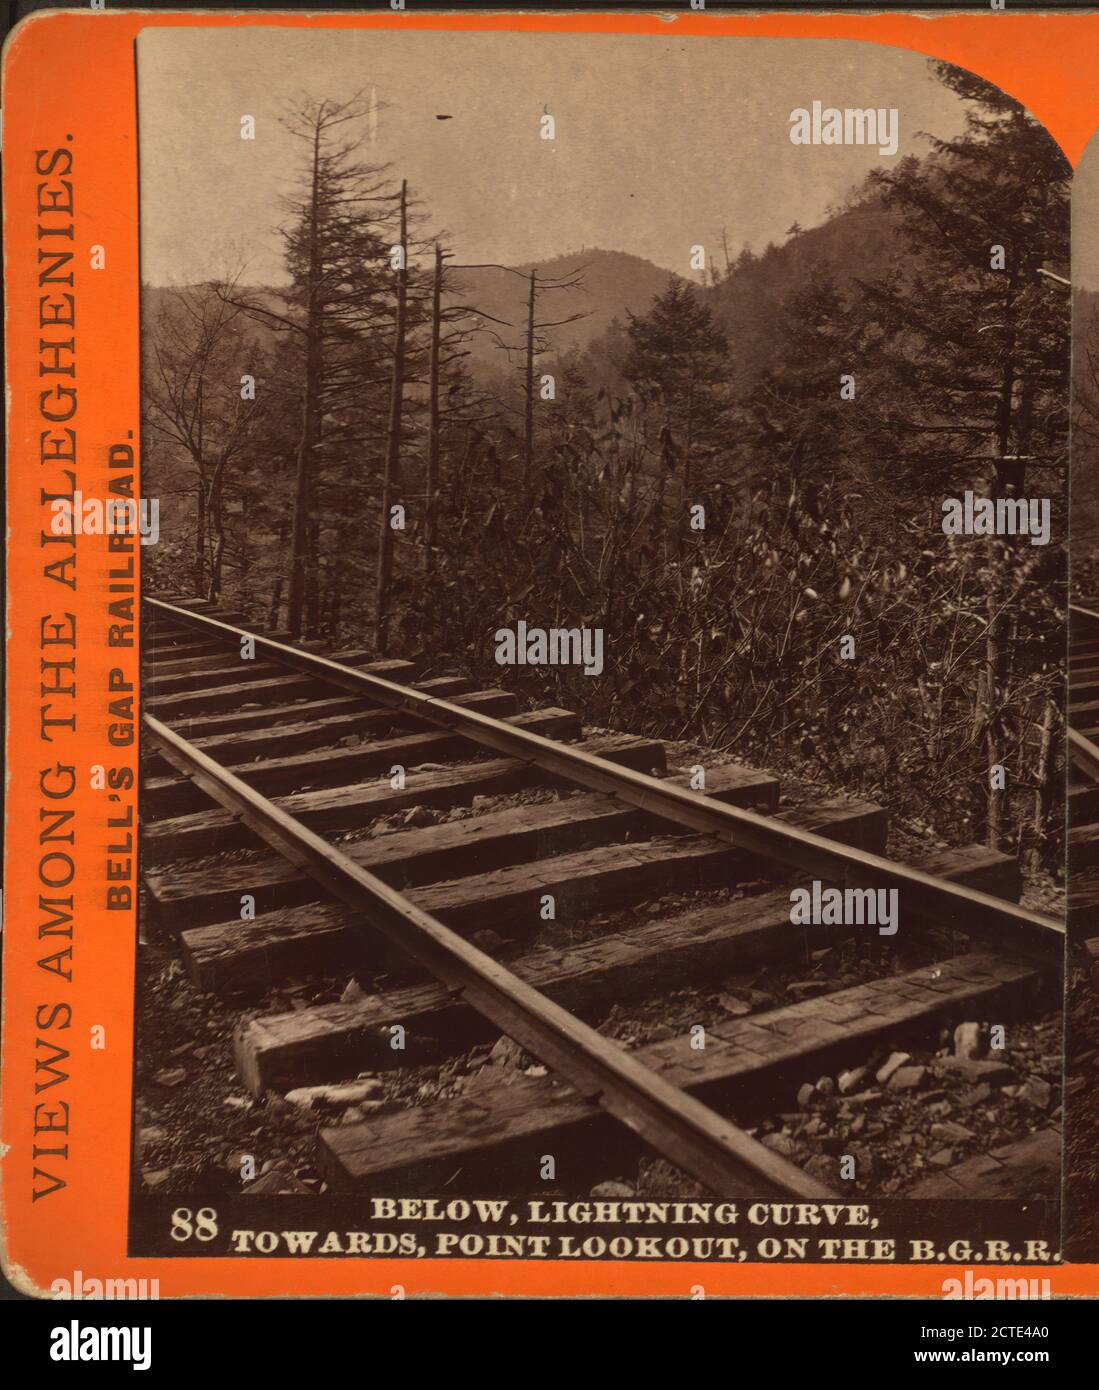 Below, Lightning Curve, towards, Point Lookout, on the B. G. R. R., Bonine, R. A., Pennsylvania Railroad, Pennsylvania, Allegheny Mountains Stock Photo